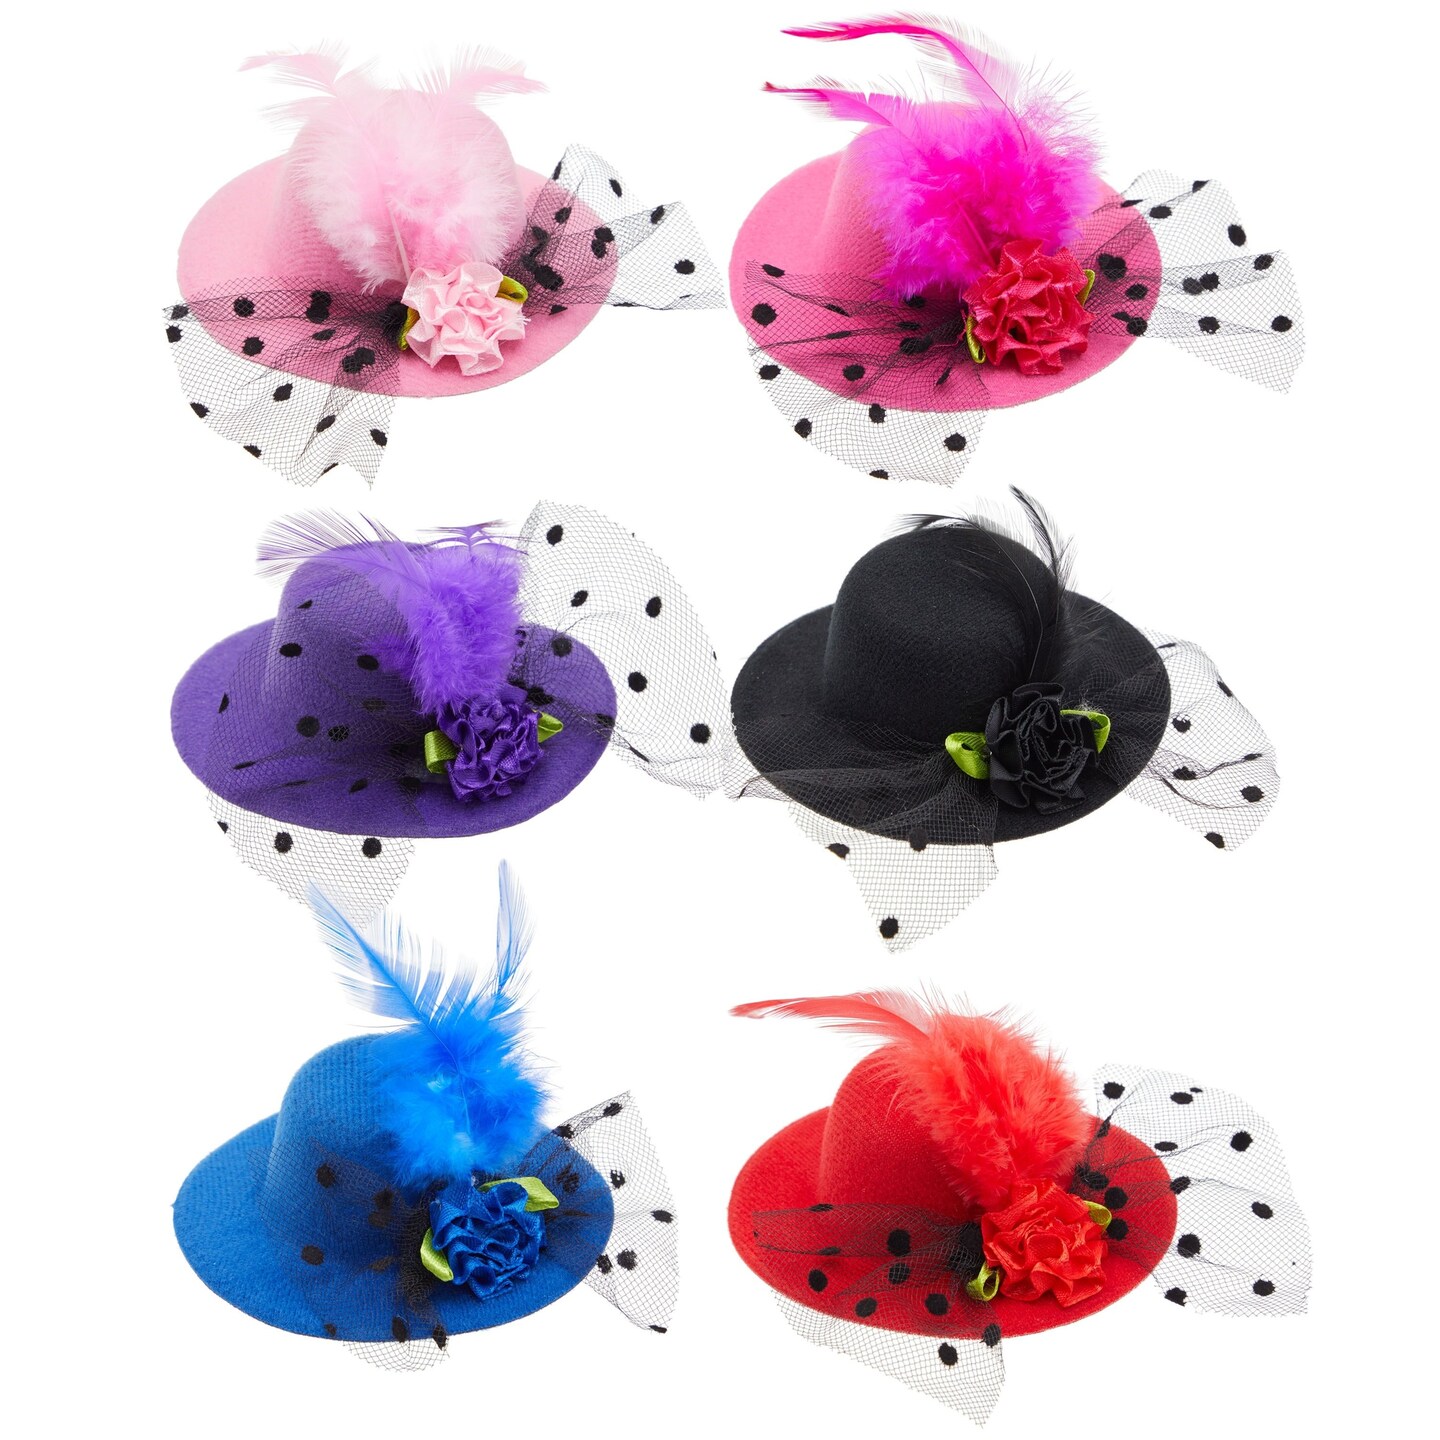 6 Pieces Mini Tea Party Hats for Women, Clip-On Design - Fancy Hair Fascinators for Women and Girls in 6 Colors, Tiny Hat Hair Clips for Tea Party Favors (4 Inches)